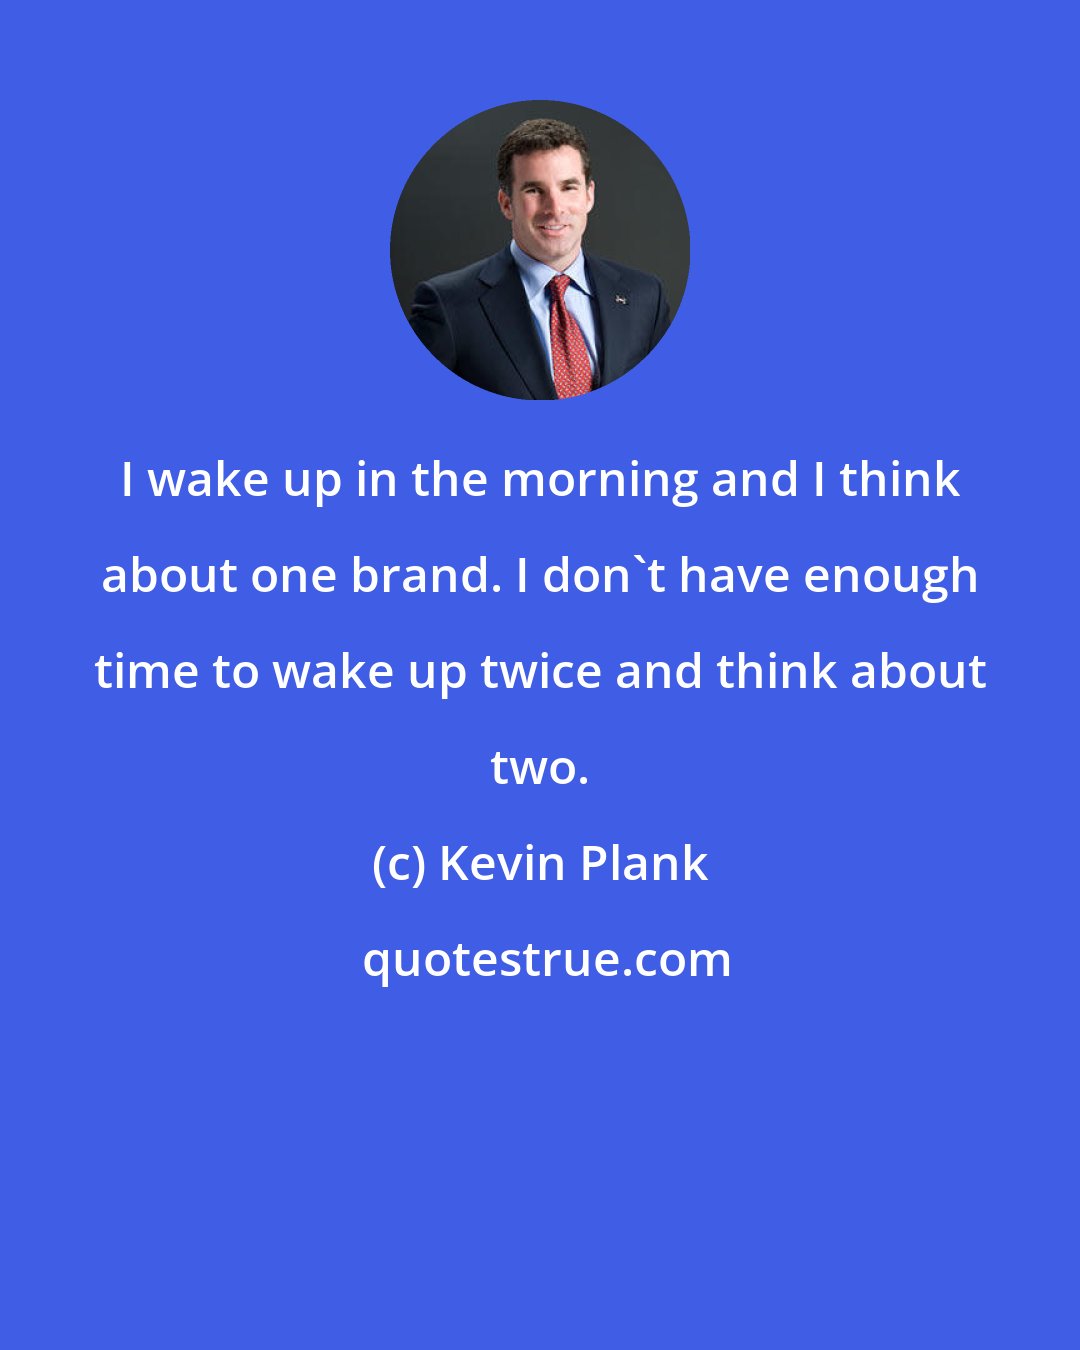 Kevin Plank: I wake up in the morning and I think about one brand. I don't have enough time to wake up twice and think about two.